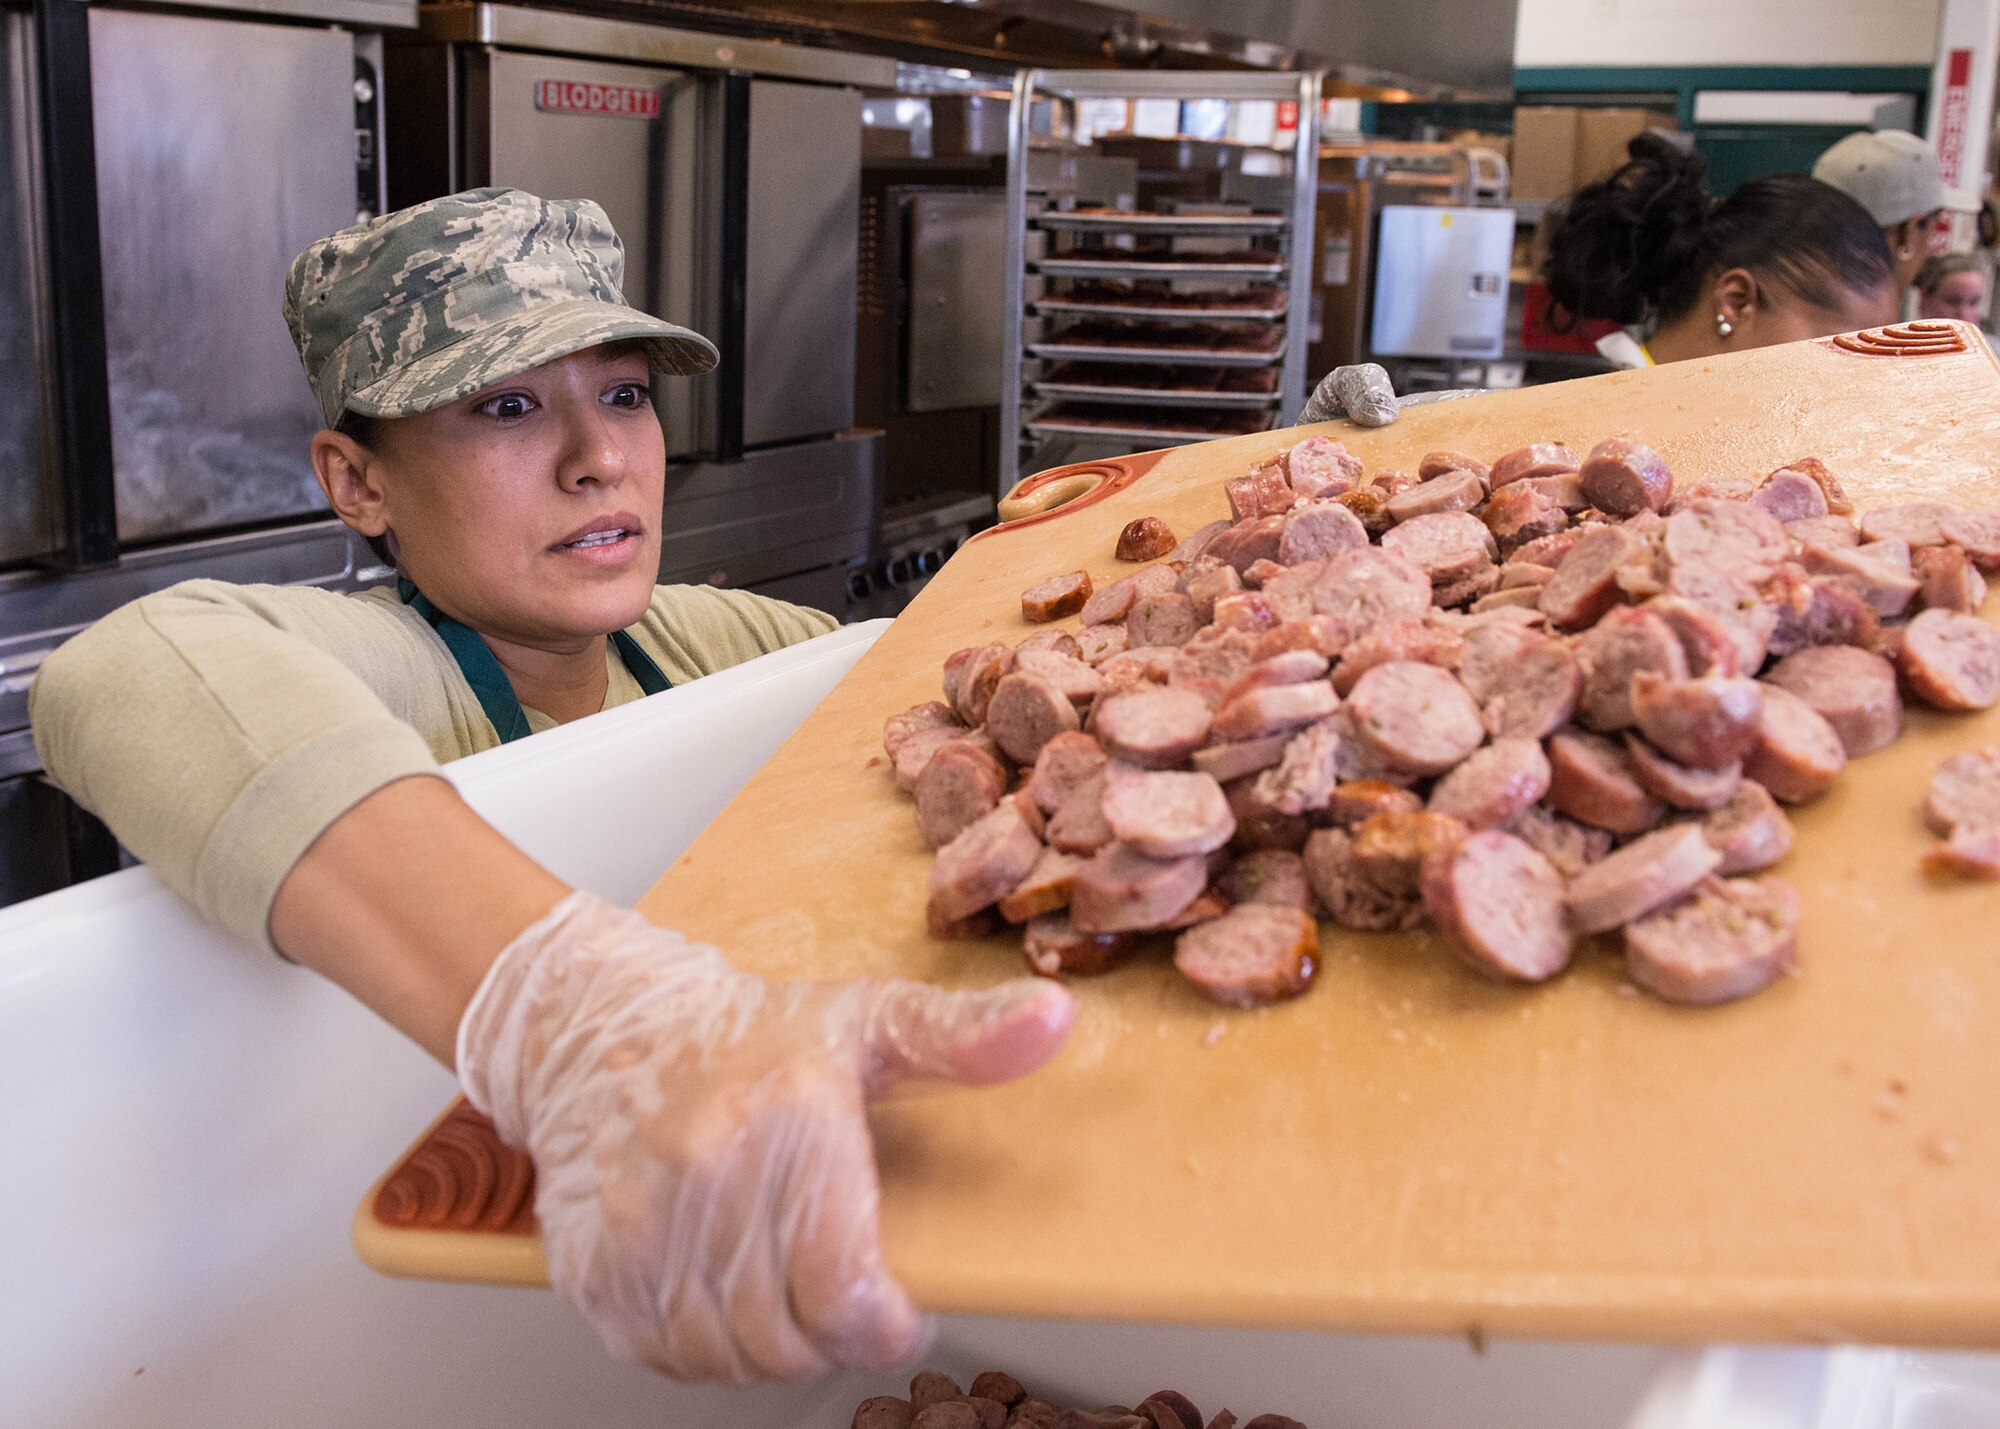 Staff Sgt. Kelly Portillo, a 66th Forces Support Squadron force management apprentice, transfers a cutting board full of sliced sausages destined for Jambalaya while volunteering at the Pine Street Inn Oct.26, 2015. Twelve Hanscom Airmen volunteered at the Pine Street Inn to prepare meals for more than 1,600 homeless men and women at three Boston area shelters. (U.S. Air Force photo/Jerry Saslav)